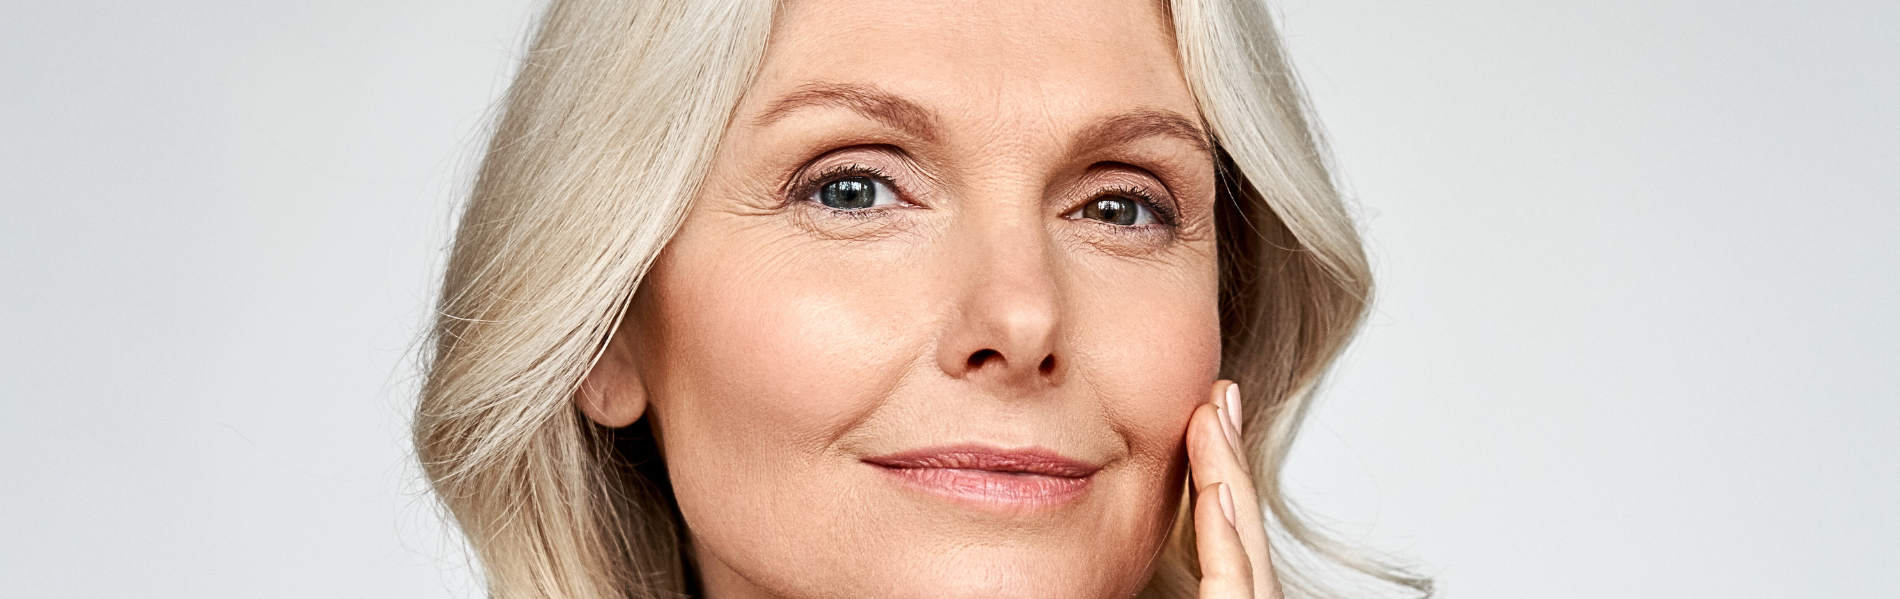 Does Red Light Therapy Actually Reduce Wrinkles in 2 Weeks?